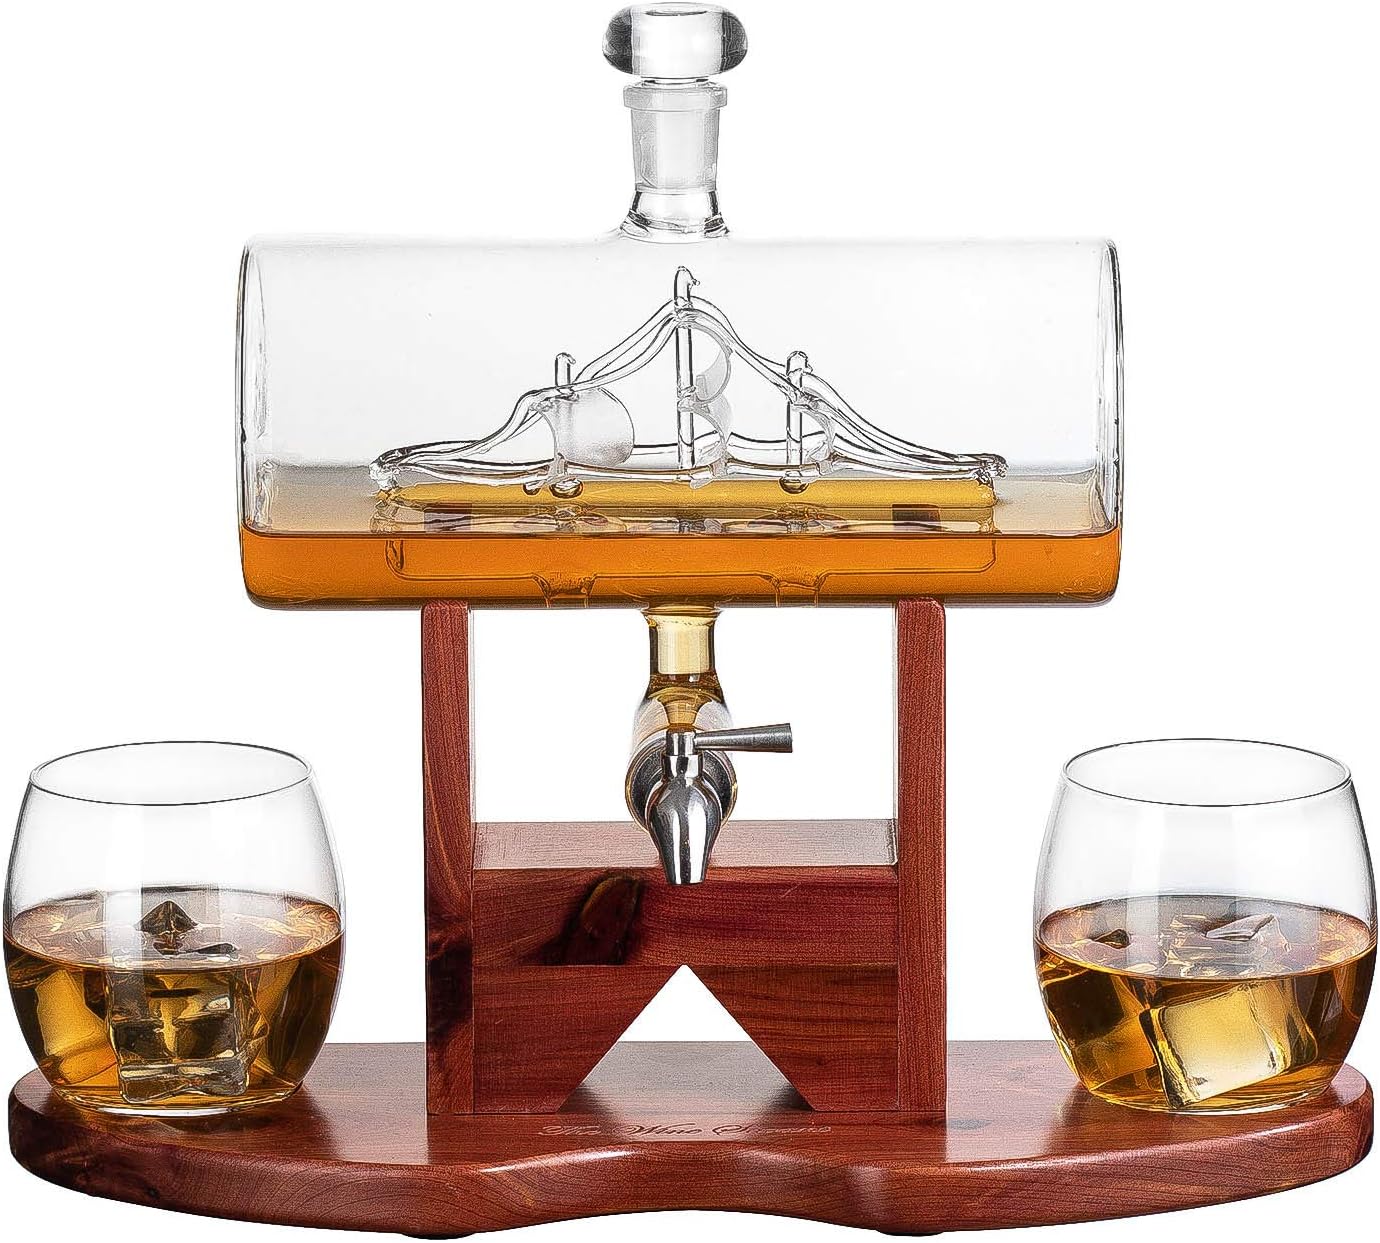 Whiskey & Wine Decanter Set 1250ml with 2 Whiskey Glasses, Liquor Dispenser For Home Bar, Ship Whiskey & Wine Decanter - Gift for Dad, Husband or Boyfriend - Liquor Lux Lead-Free Crystal Glass